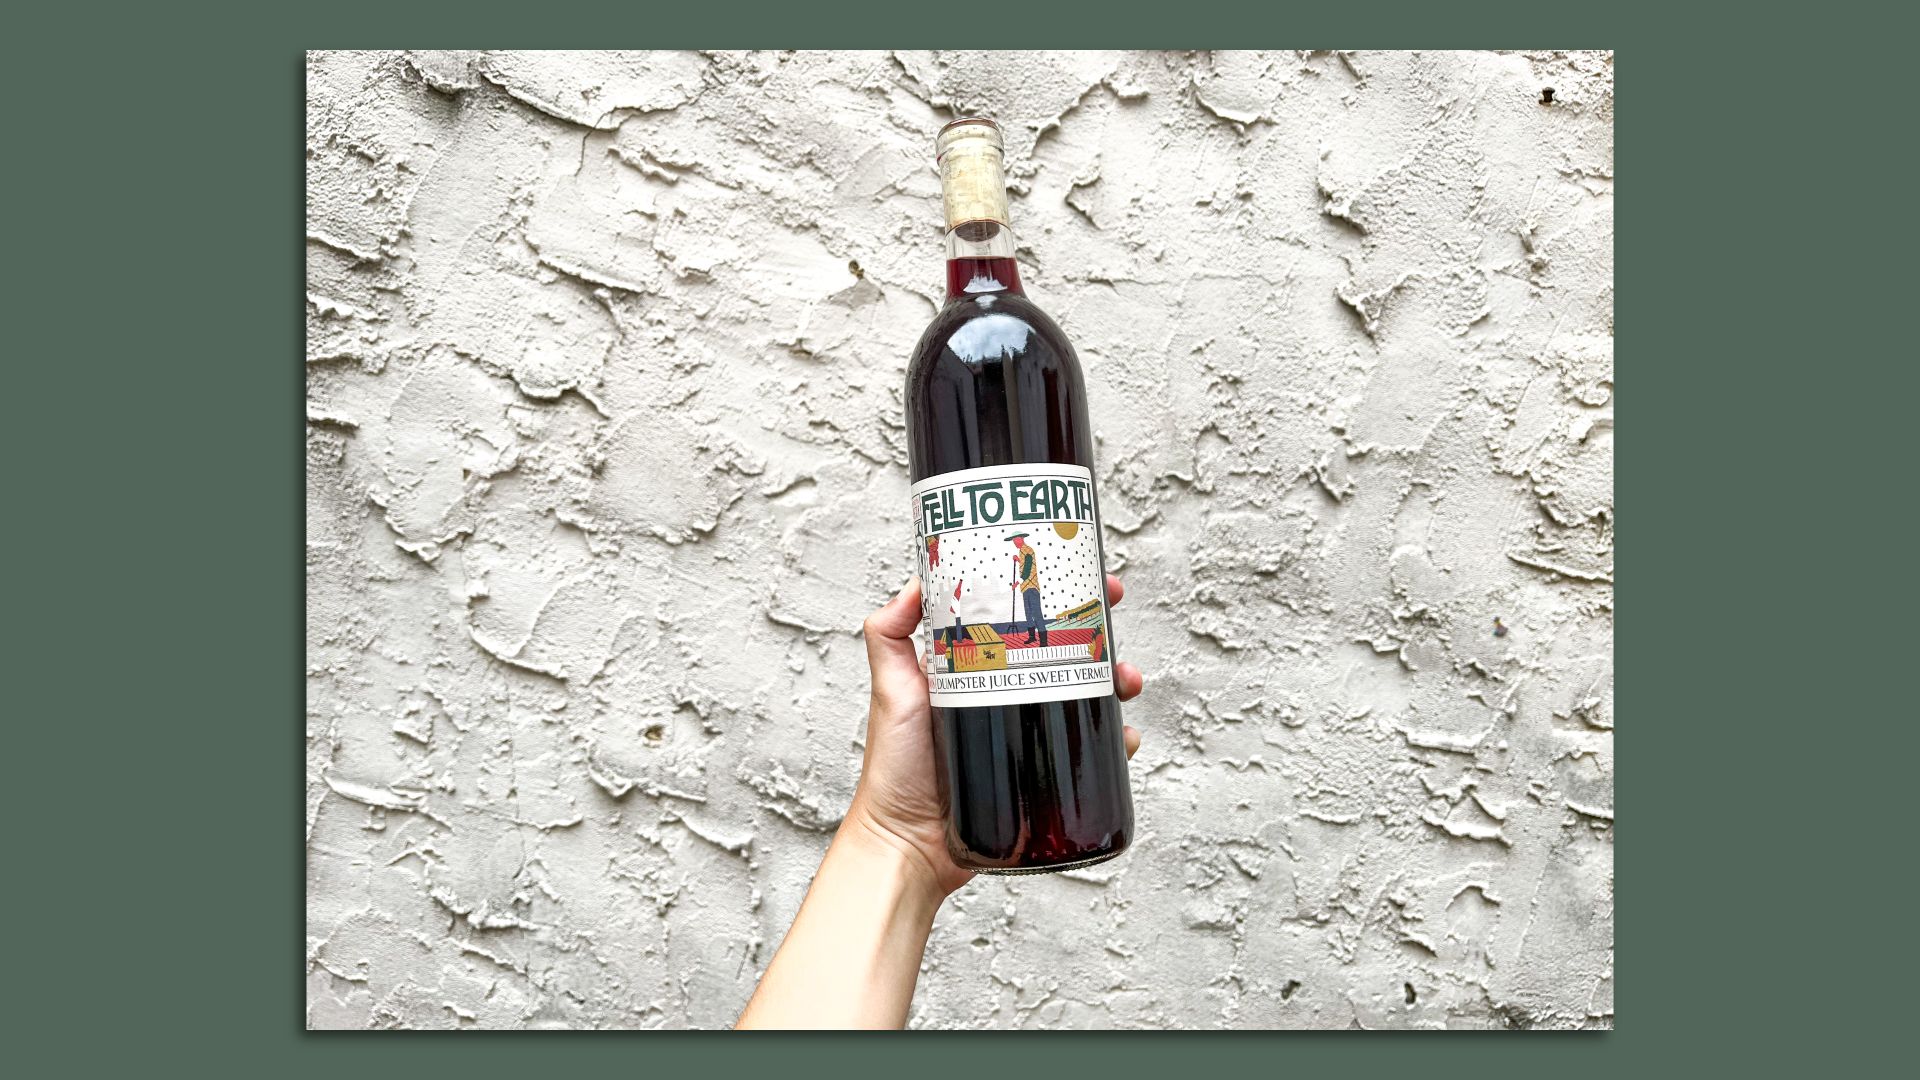 A hand holding up a bottle of the first batch of Dumpster Juice vermouth under the Fell to Earth label.